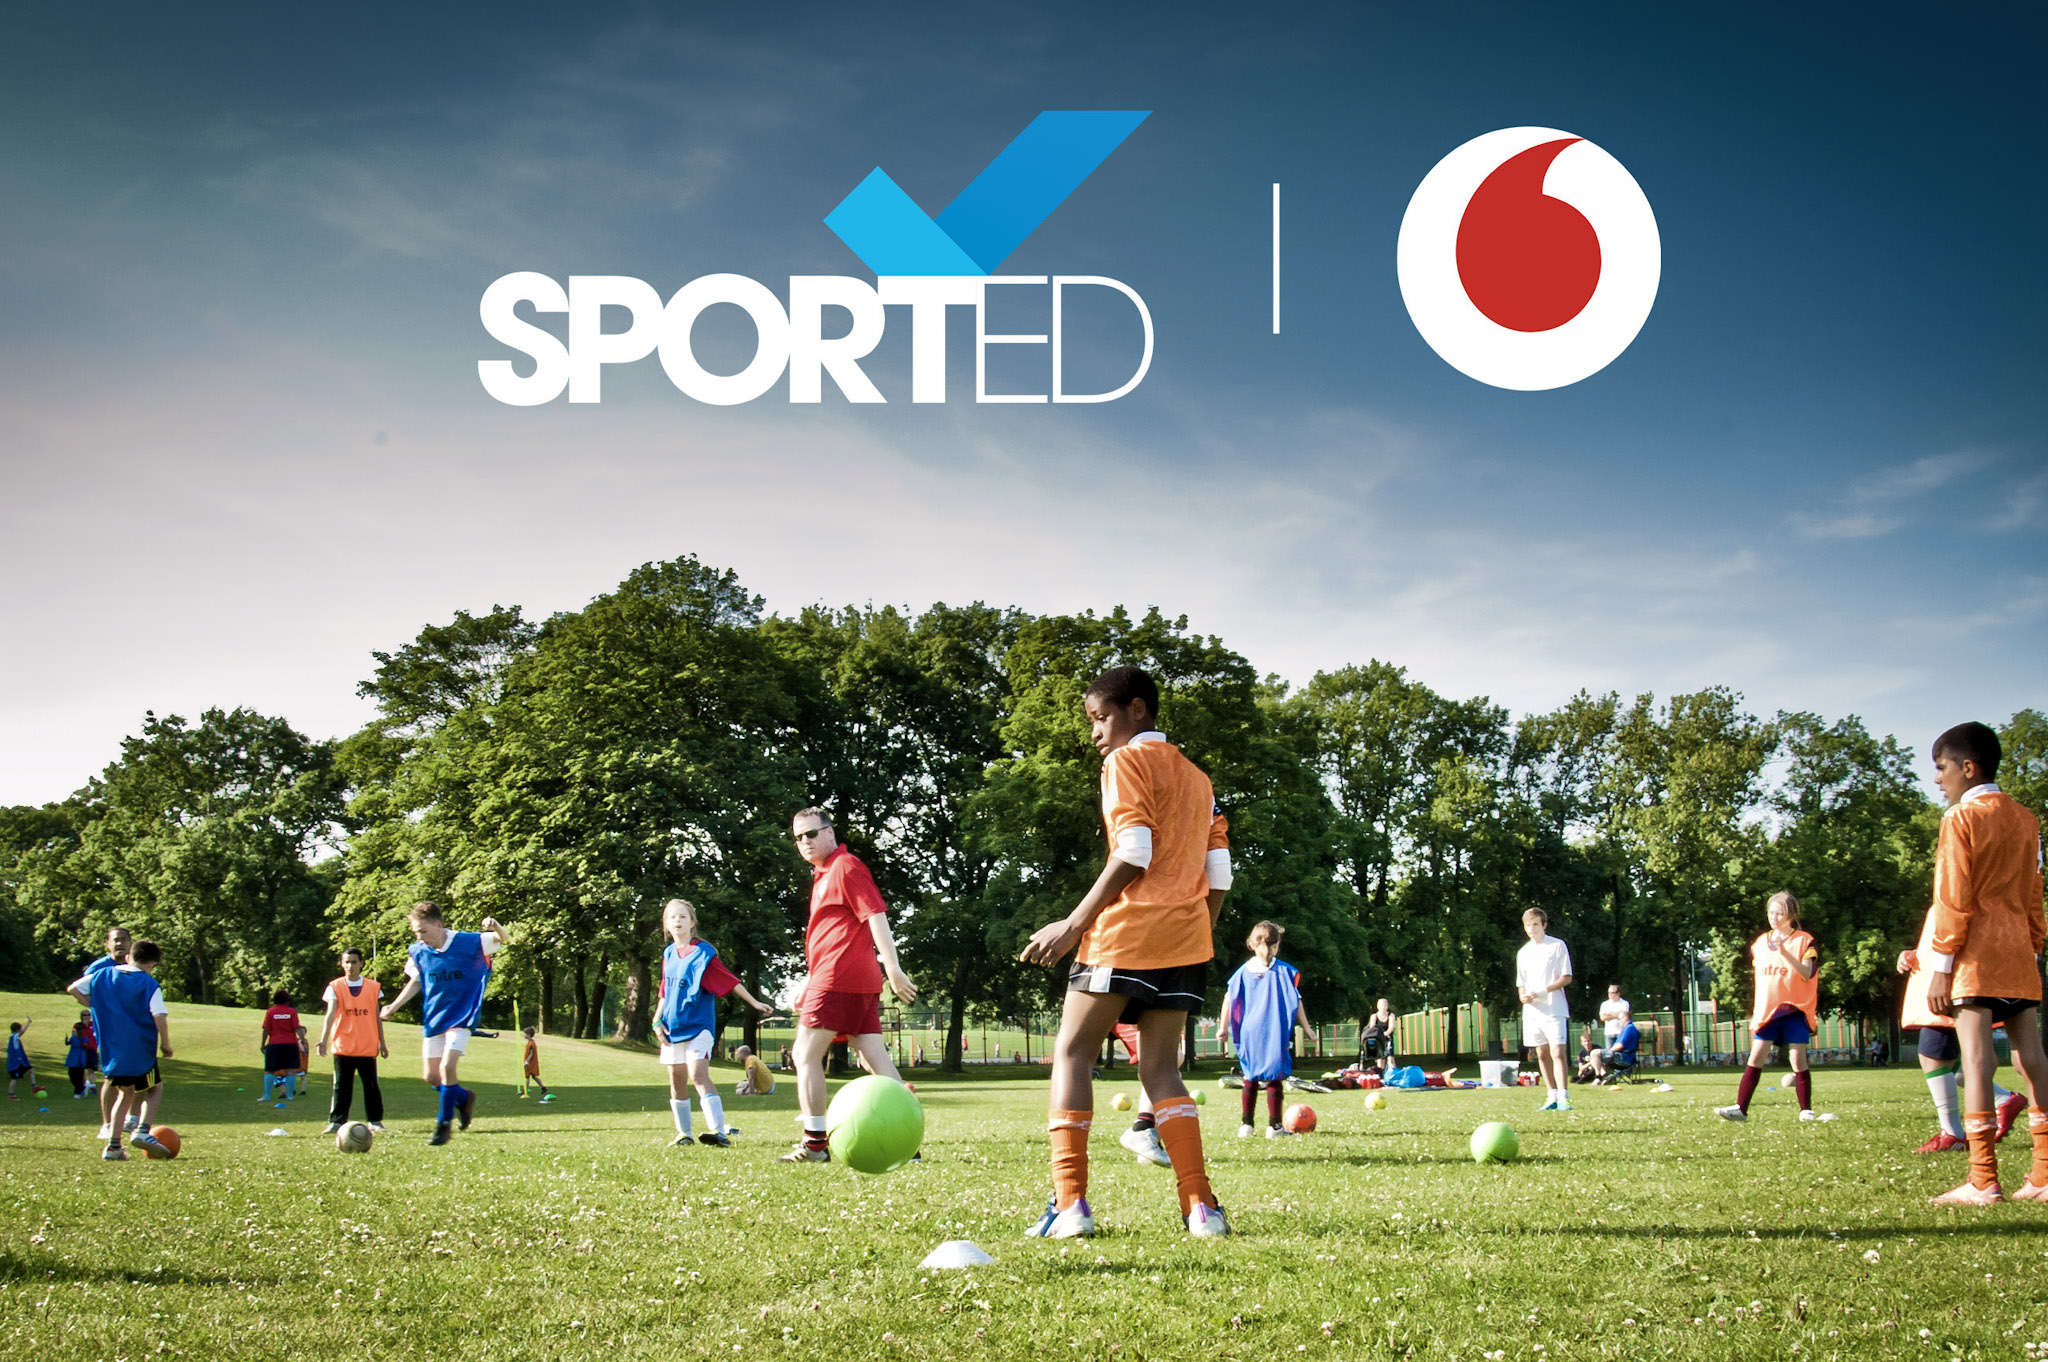 photo of a grassroots community football match with the Sported and Vodafone logos superimposed over the sky